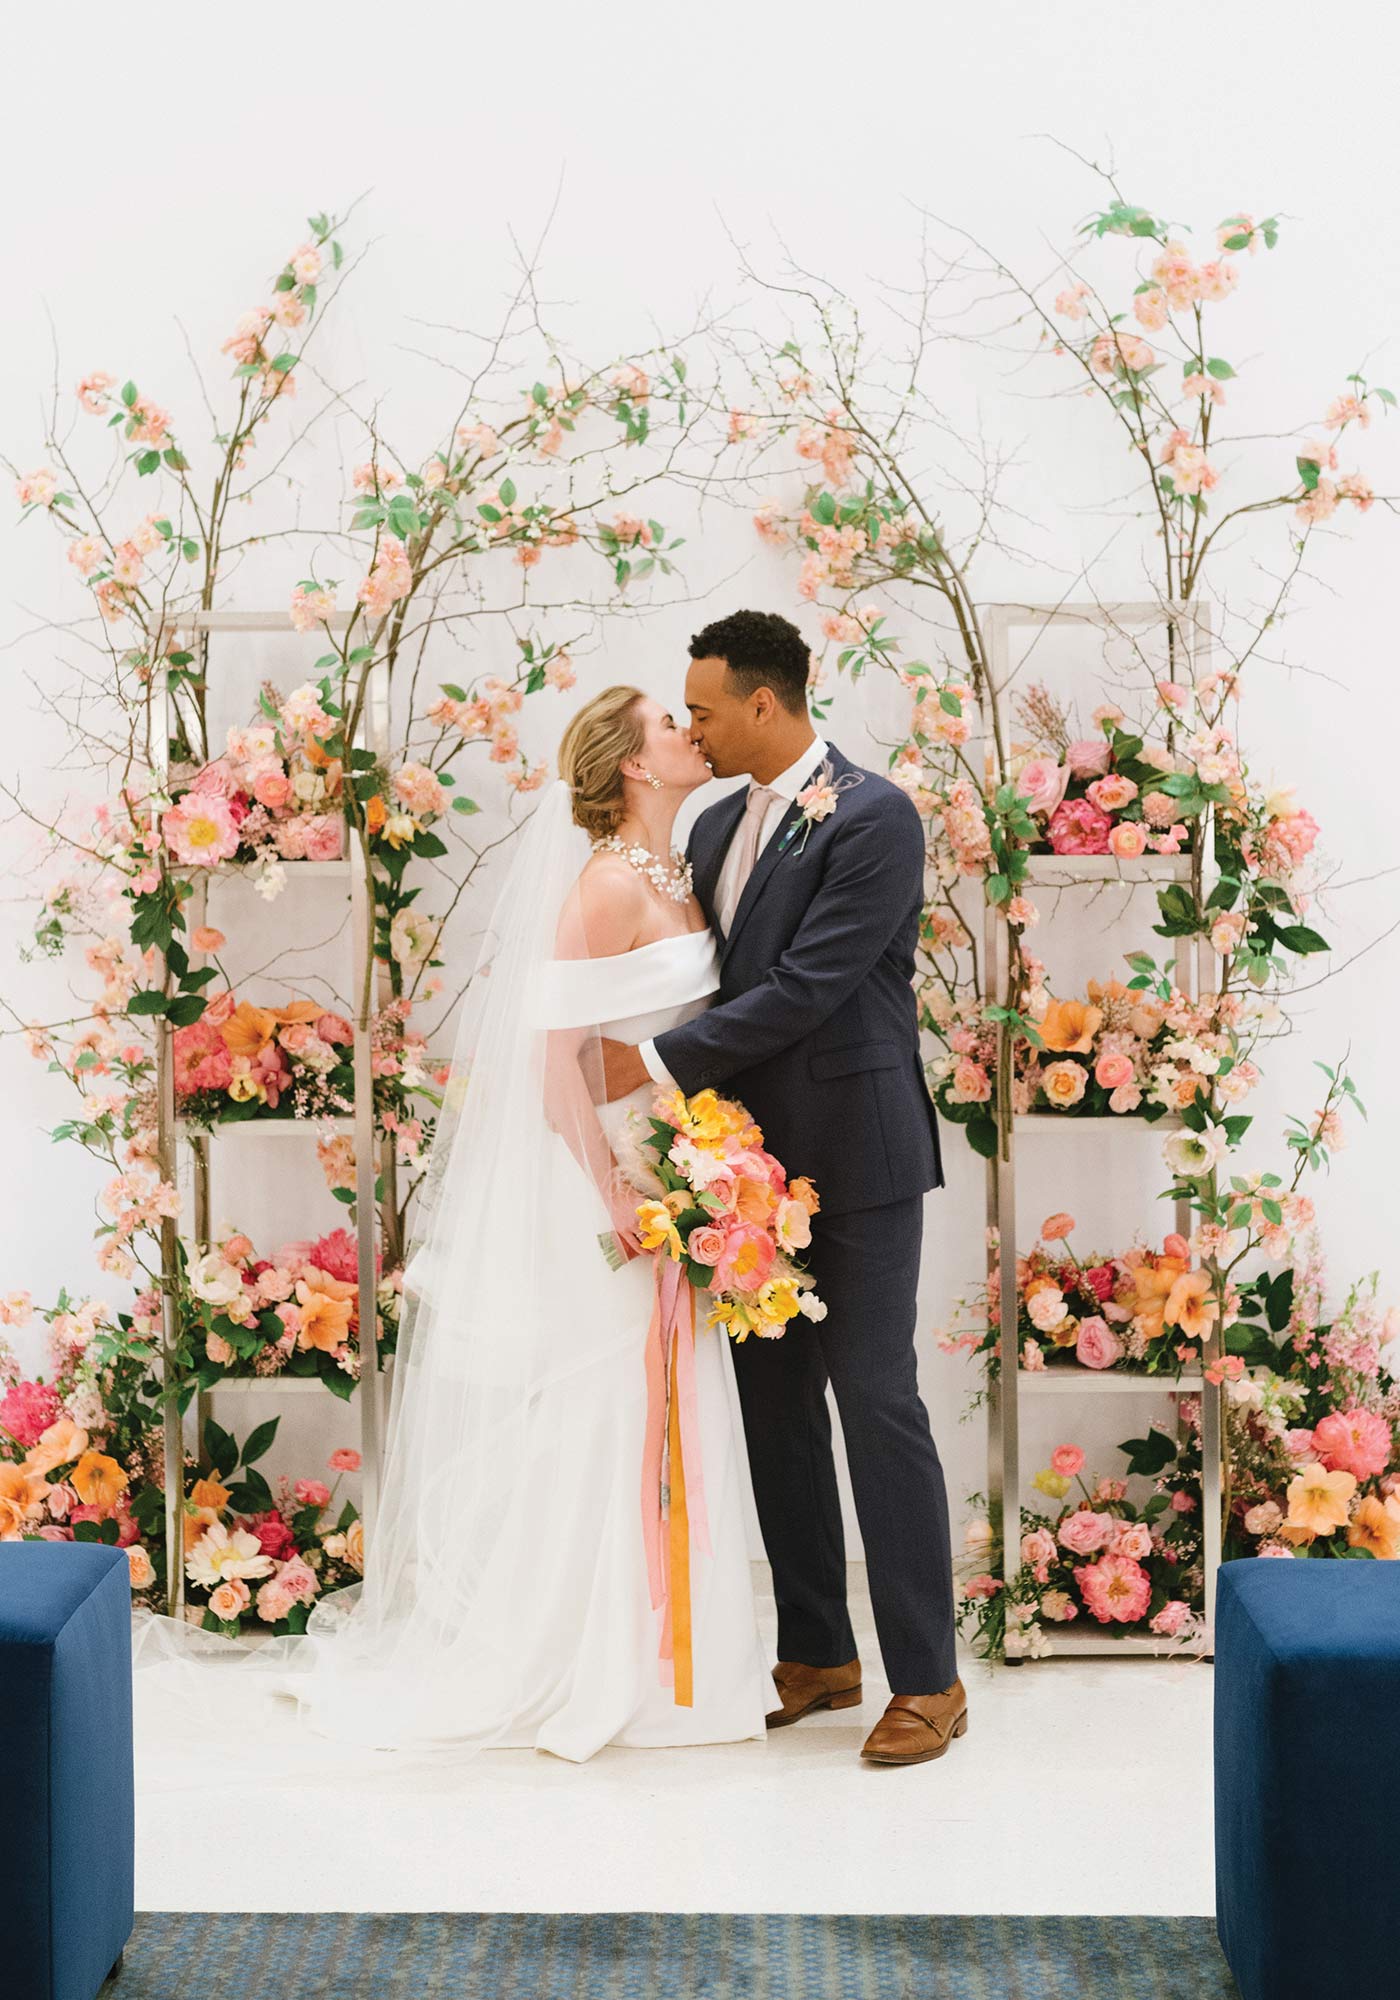 Jen Fariello Photography, Quirk Hotel Charlottesville, Southern Blooms by Pat’s Floral Designs, Just a Little Ditty, The One Bridal Salon, Top Knot Studio, Rouge 9